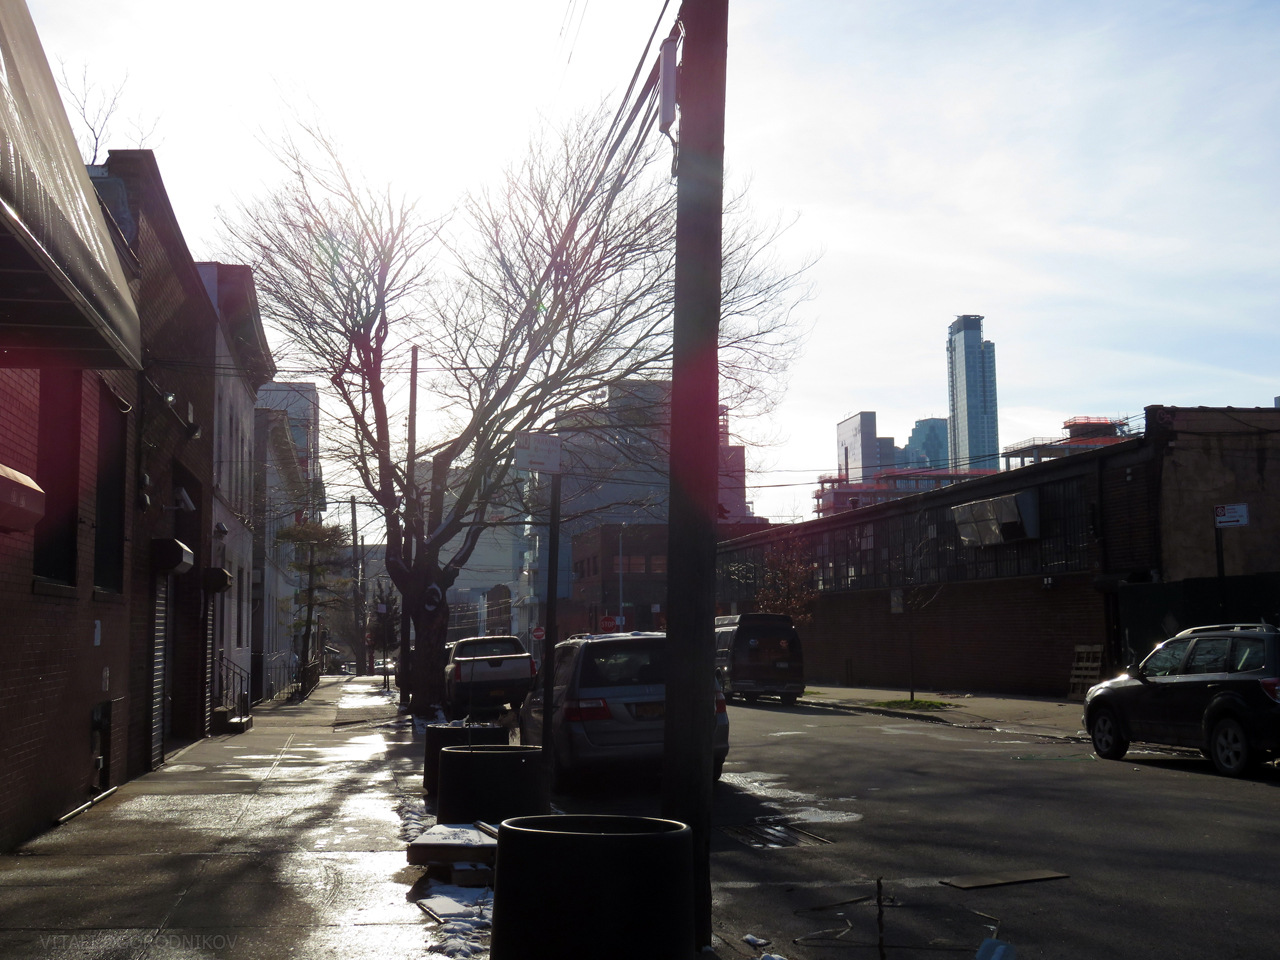 Looking south along 32nd Street. The Long Island City skyline is in the background.